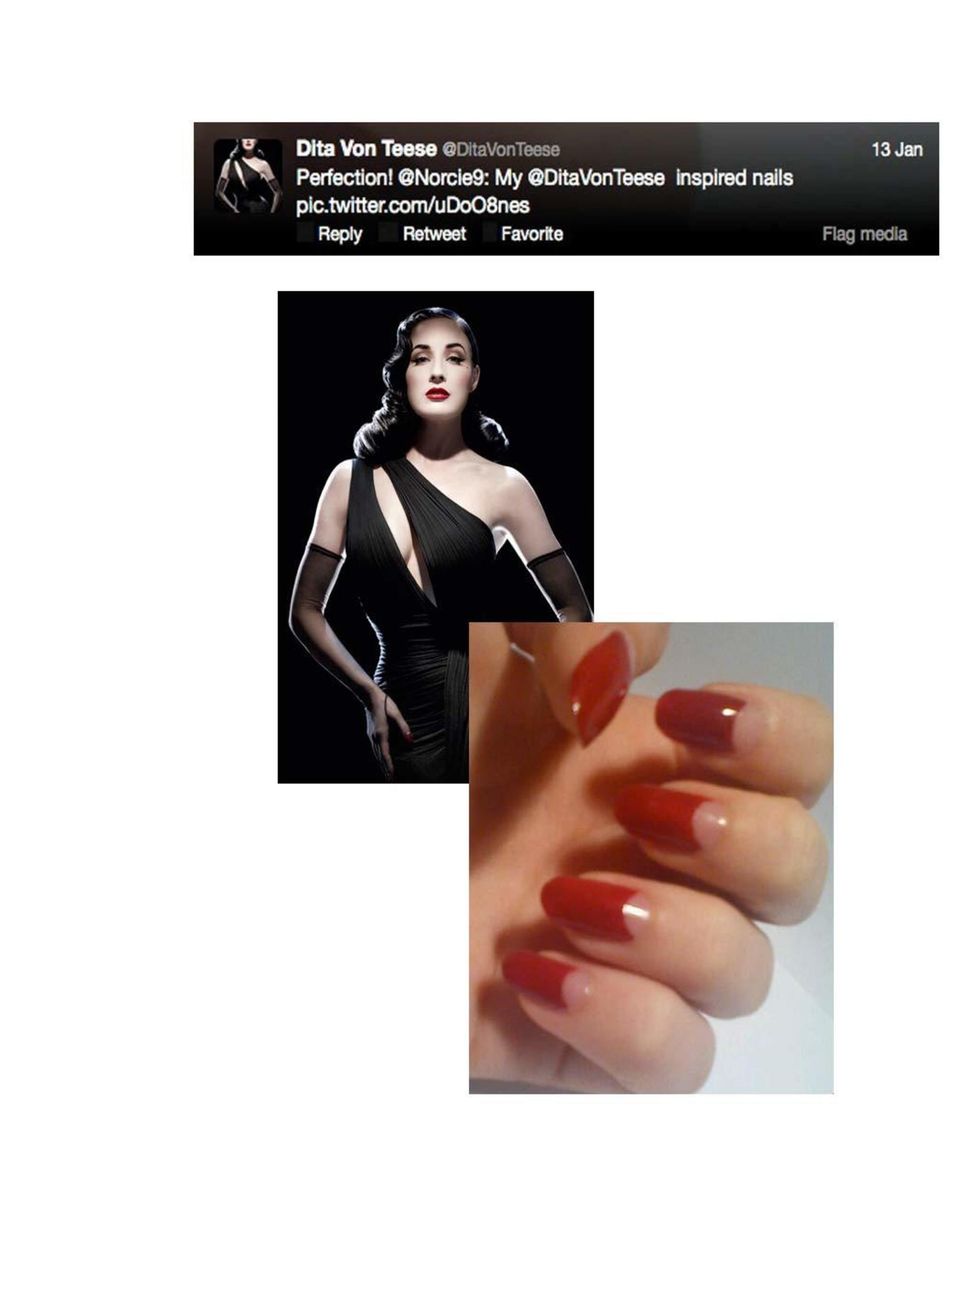 <p><a href="http://www.elleuk.com/beauty/news/dita-von-teese-talks-to-elle">Dita Von Teese</a></p><p>Perfection! @Norcie9: My @DitaVonTeese inspired <a href="http://www.elleuk.com/beauty/make-up-skin/make-up-features/50-best-spring-nail-colours">nails</a>